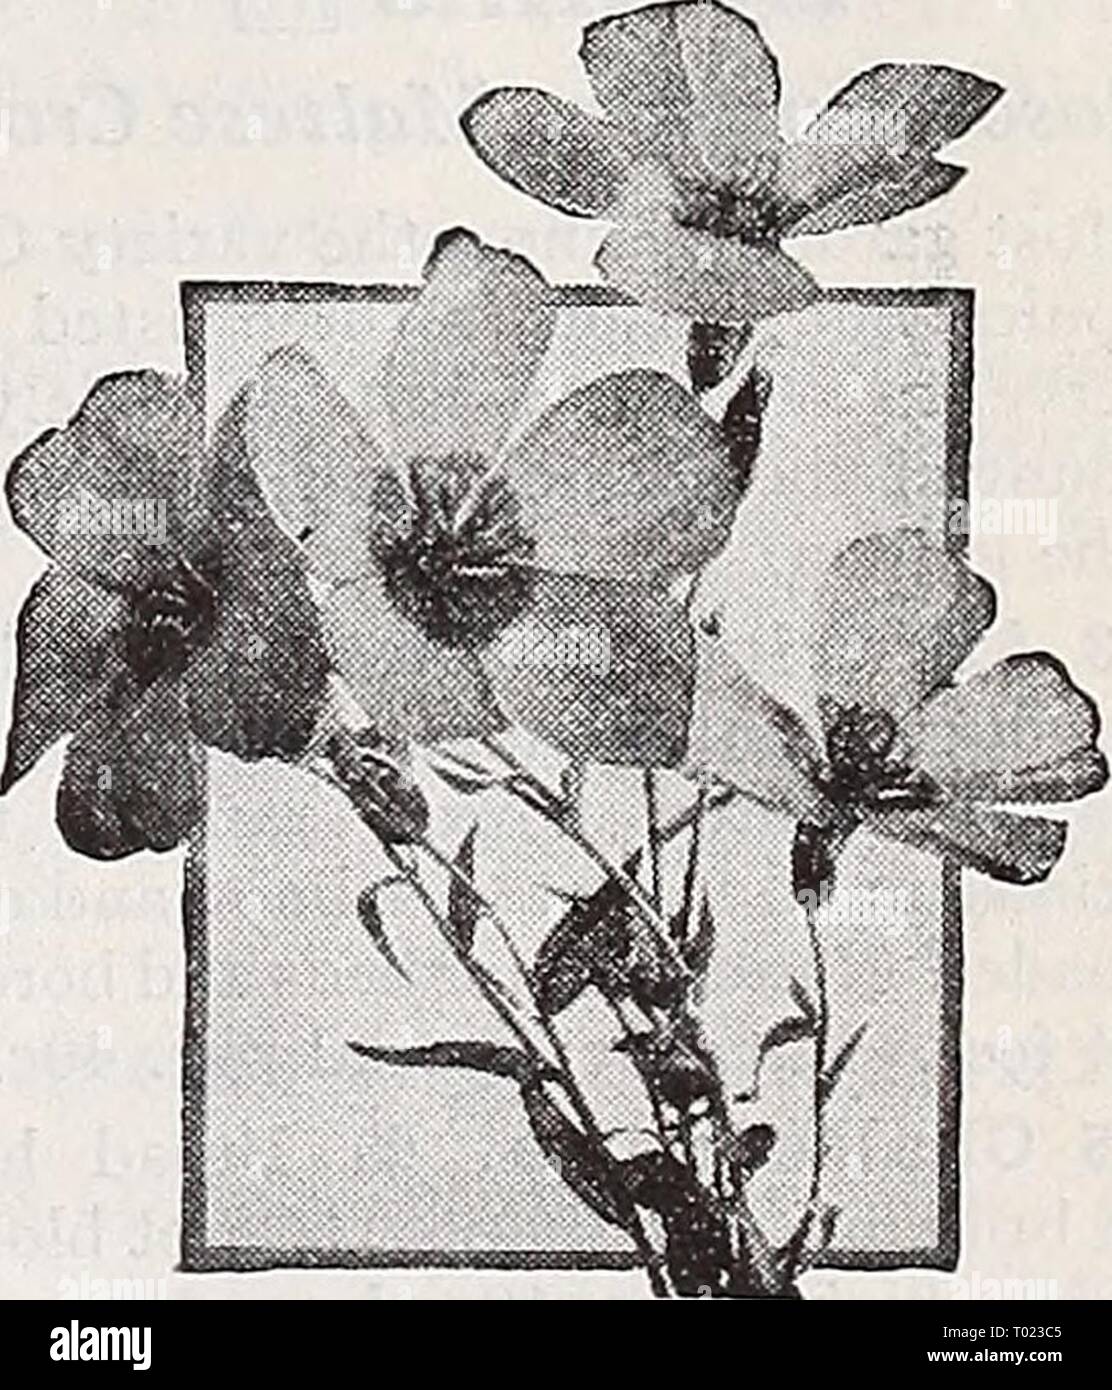 Dreer's garden book 1939 : 101 years of Dreer quality seeds plants bulbs . dreersgardenbook1939henr Year: 1939  Linaria, Fairy Bouquet Linaria ® & iH a 2795 Cymbalaria {Kenilworth Ivy, Mother of Thousands). 11 ® A charming, neat, hardy perennial trailing plant with lovely bright green foliage and graceful lavender and purple flowers. Pkt. 10c; special pkt. SOc. 2797 Maroccana, Excelsior Hybrids. ® A dainty, easy-to-grow annual bear- ing small spikes like miniature Snap- dragons with flowers in yellow, crimson, pink, purple, etc. Fine for beds and rock gardens. 12 inches. Pkt. 10c; 4 oz. 25c. 2 Stock Photo